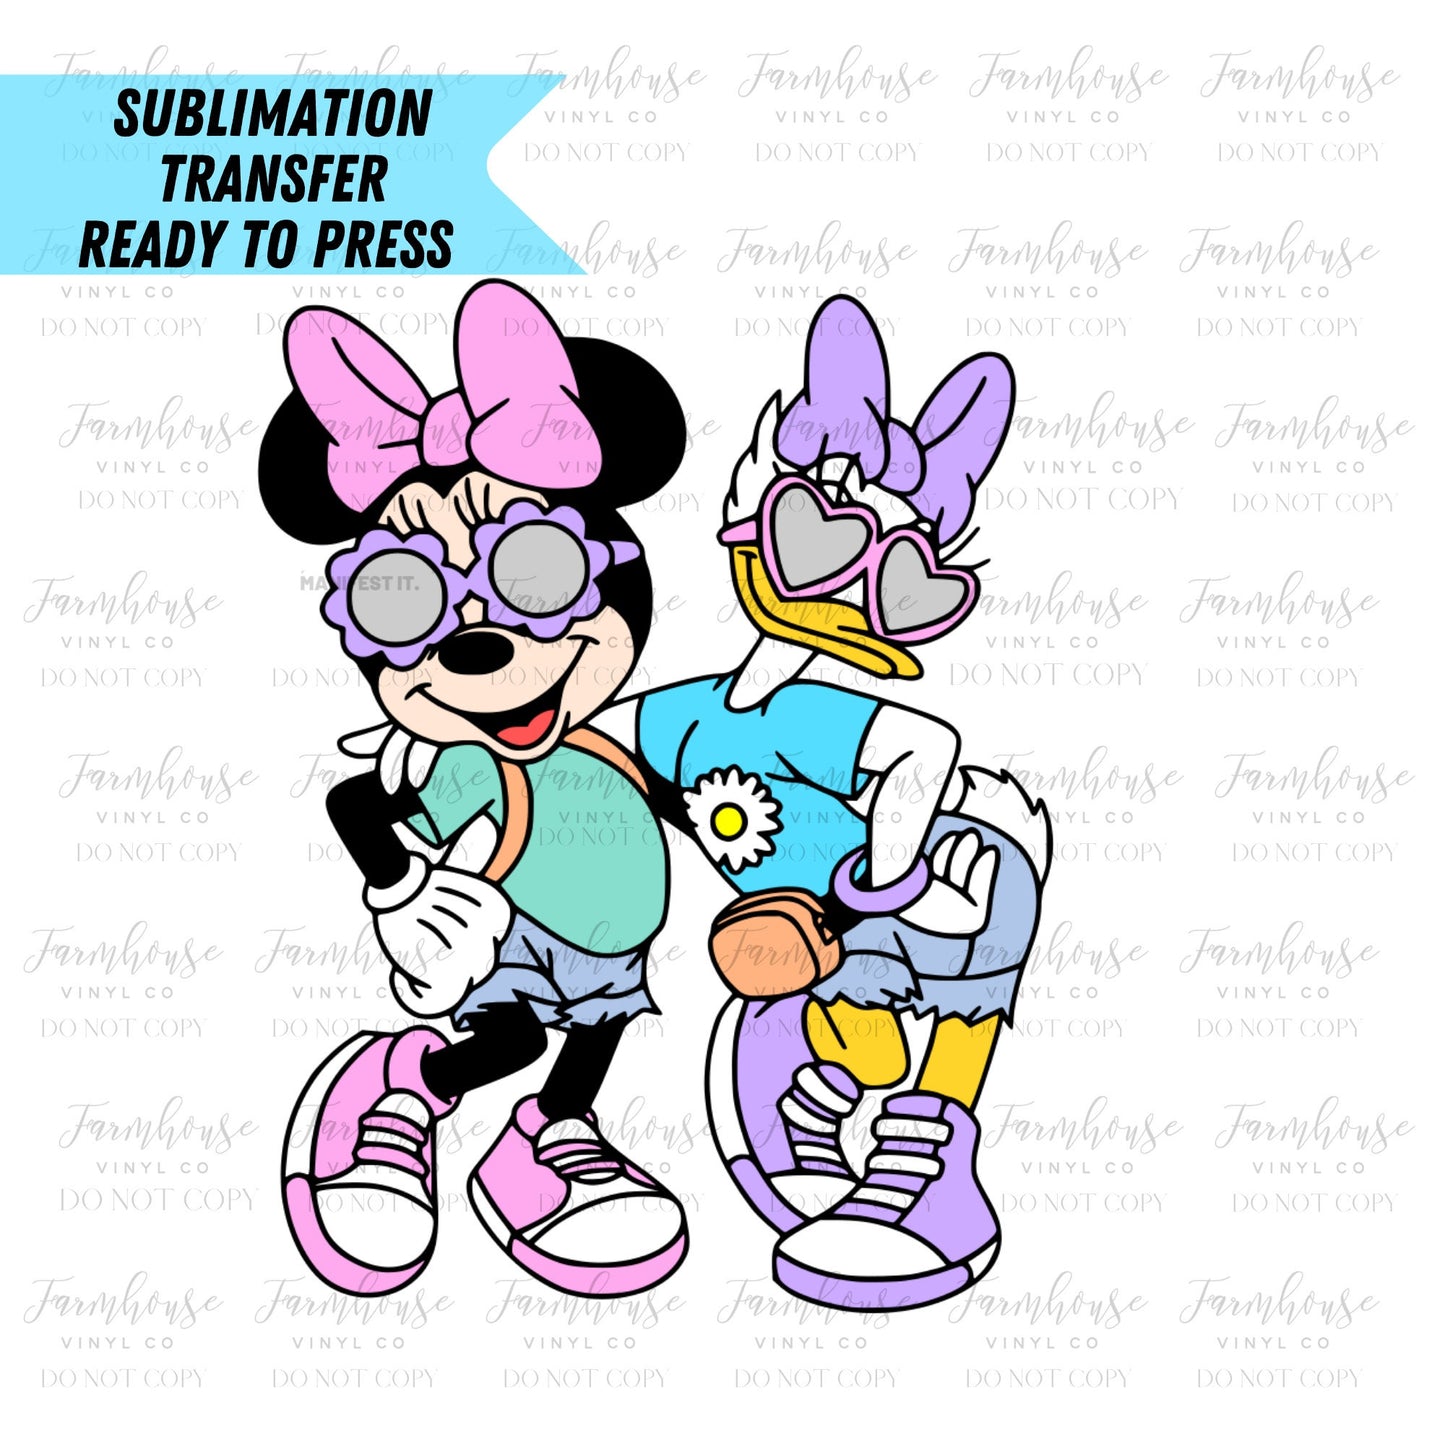 Fantastic Friends Design, Ready To Press, Sublimation Transfers, Magical Vacation, Sublimation, Transfer Ready To Press, Duck & Mouse Design - Farmhouse Vinyl Co